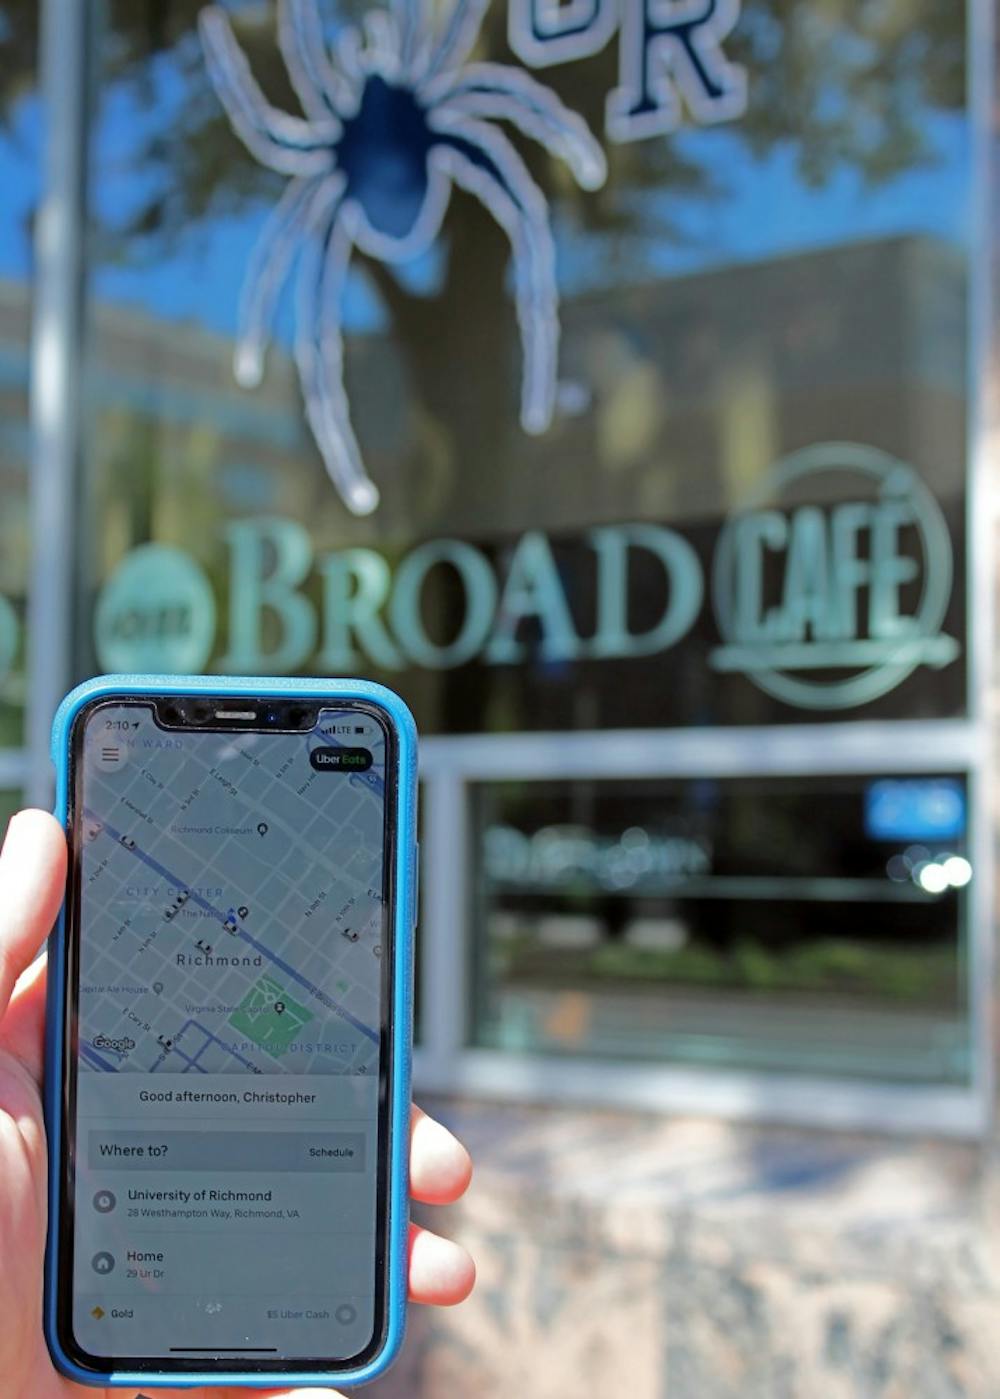 The University of Richmond Downtown on East Broad Street is now accessible to students via Uber.